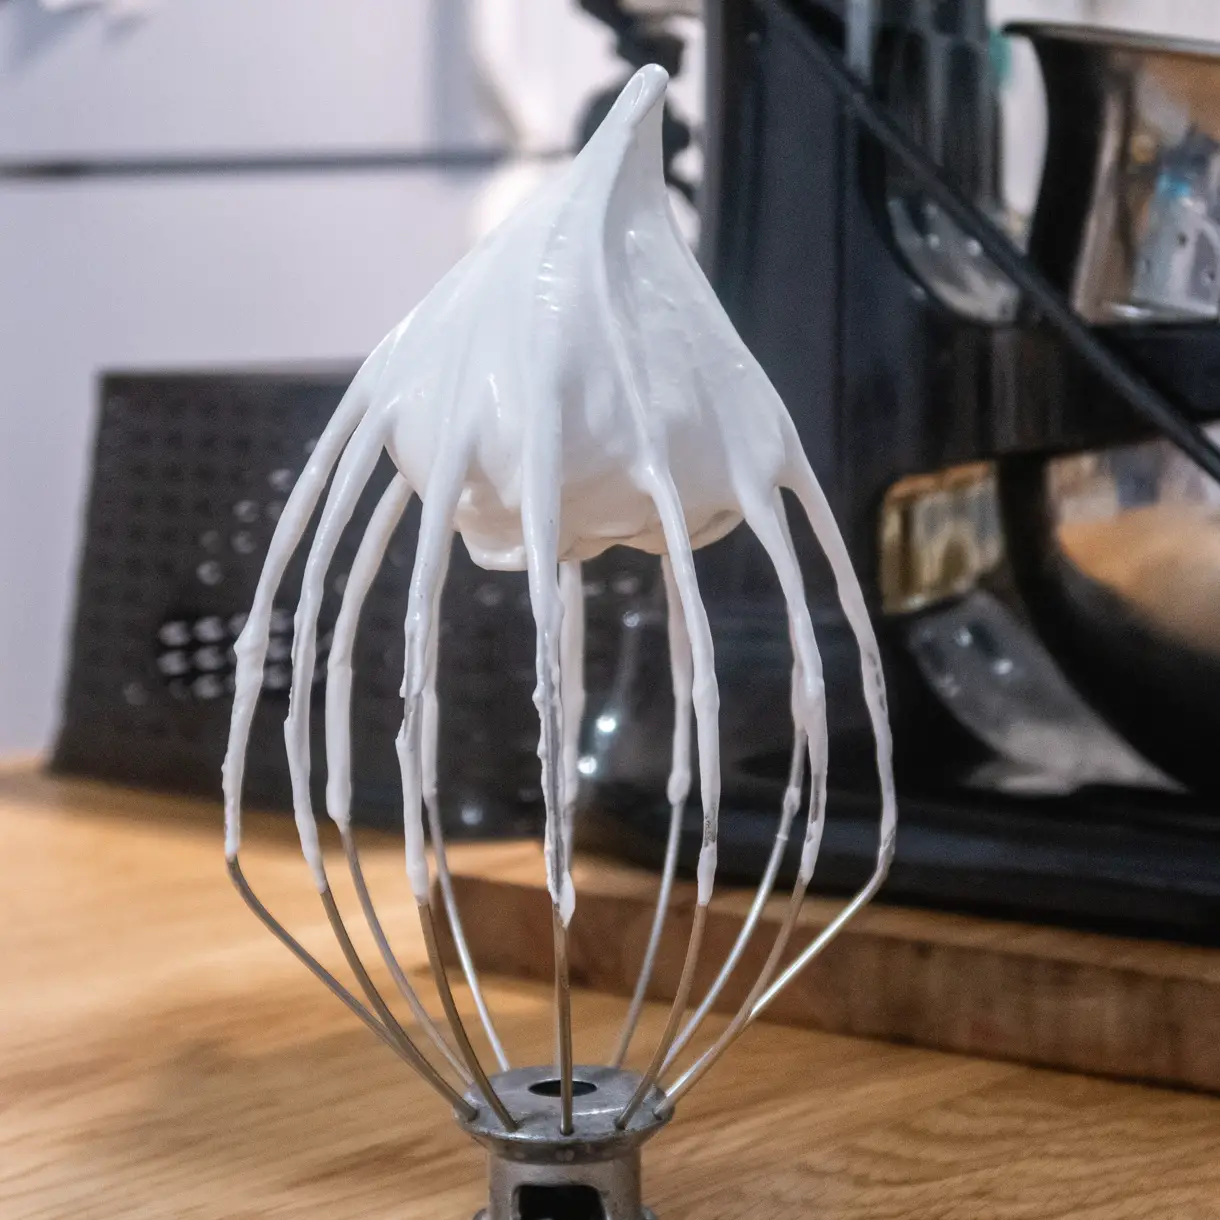 Thick and glossy vegan Italian meringue standing straight up on the whisk of a stand mixer.